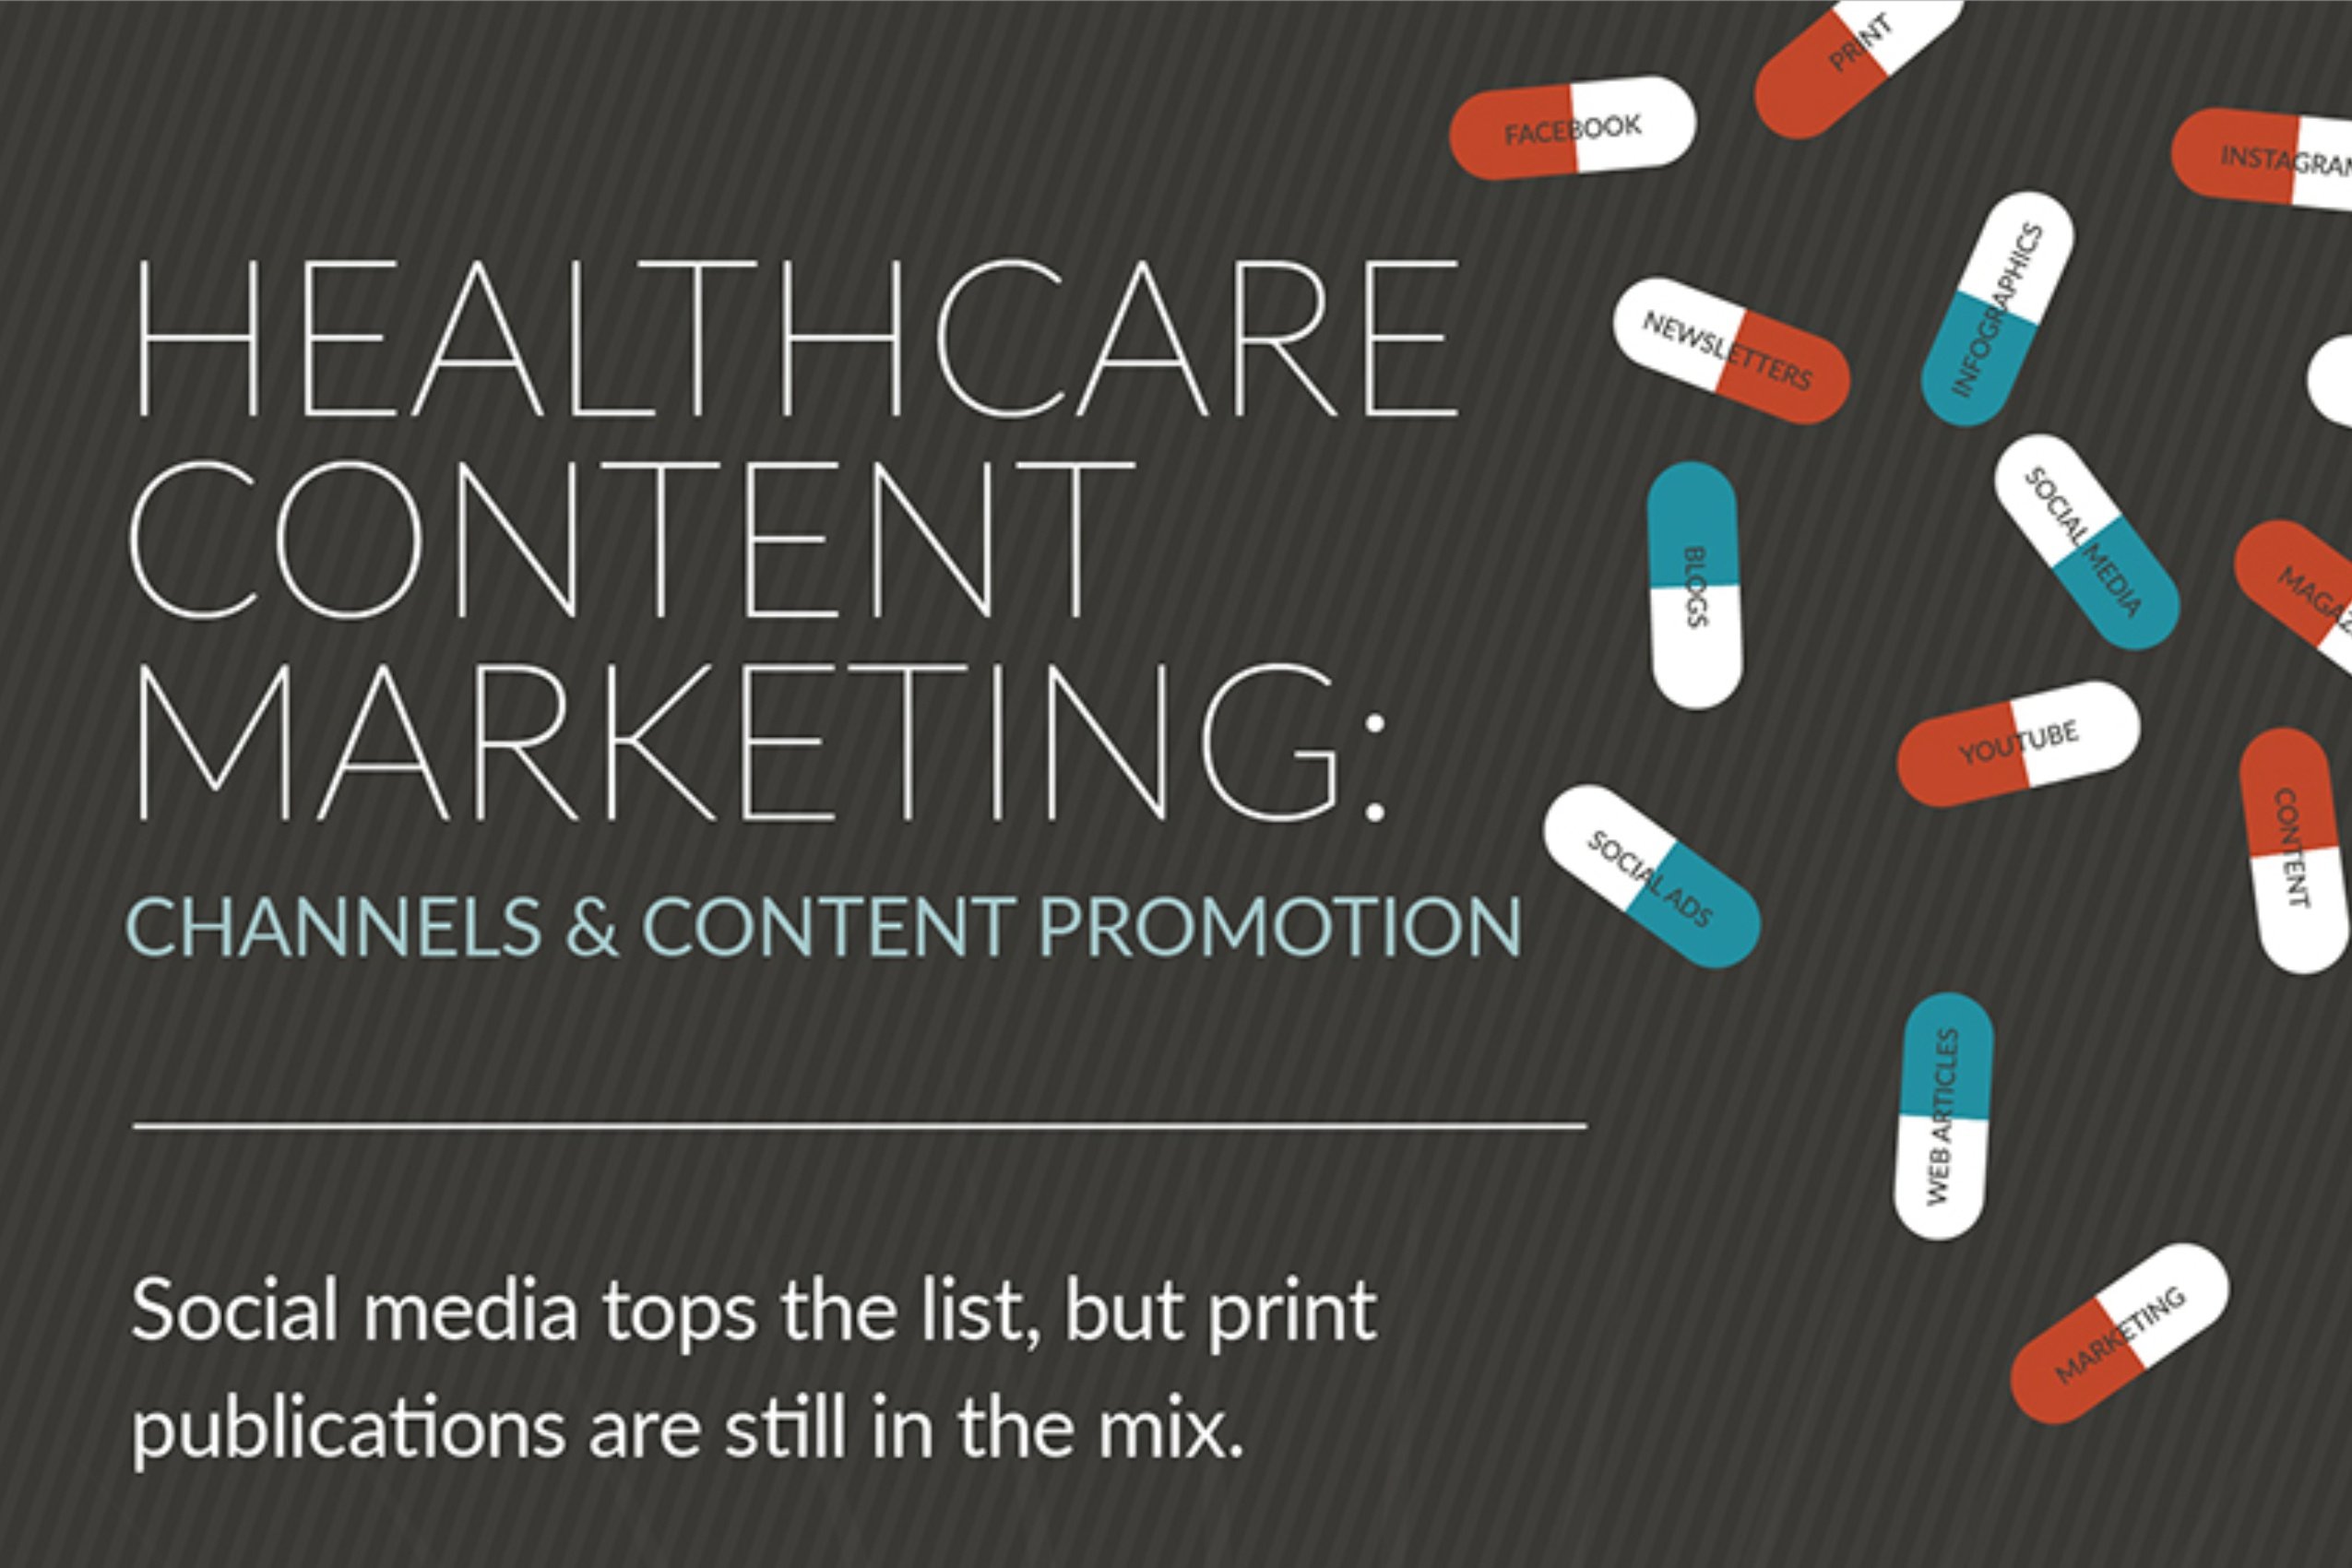 Healthcare Content Marketing_ Channels & Content Promotion (infographic)